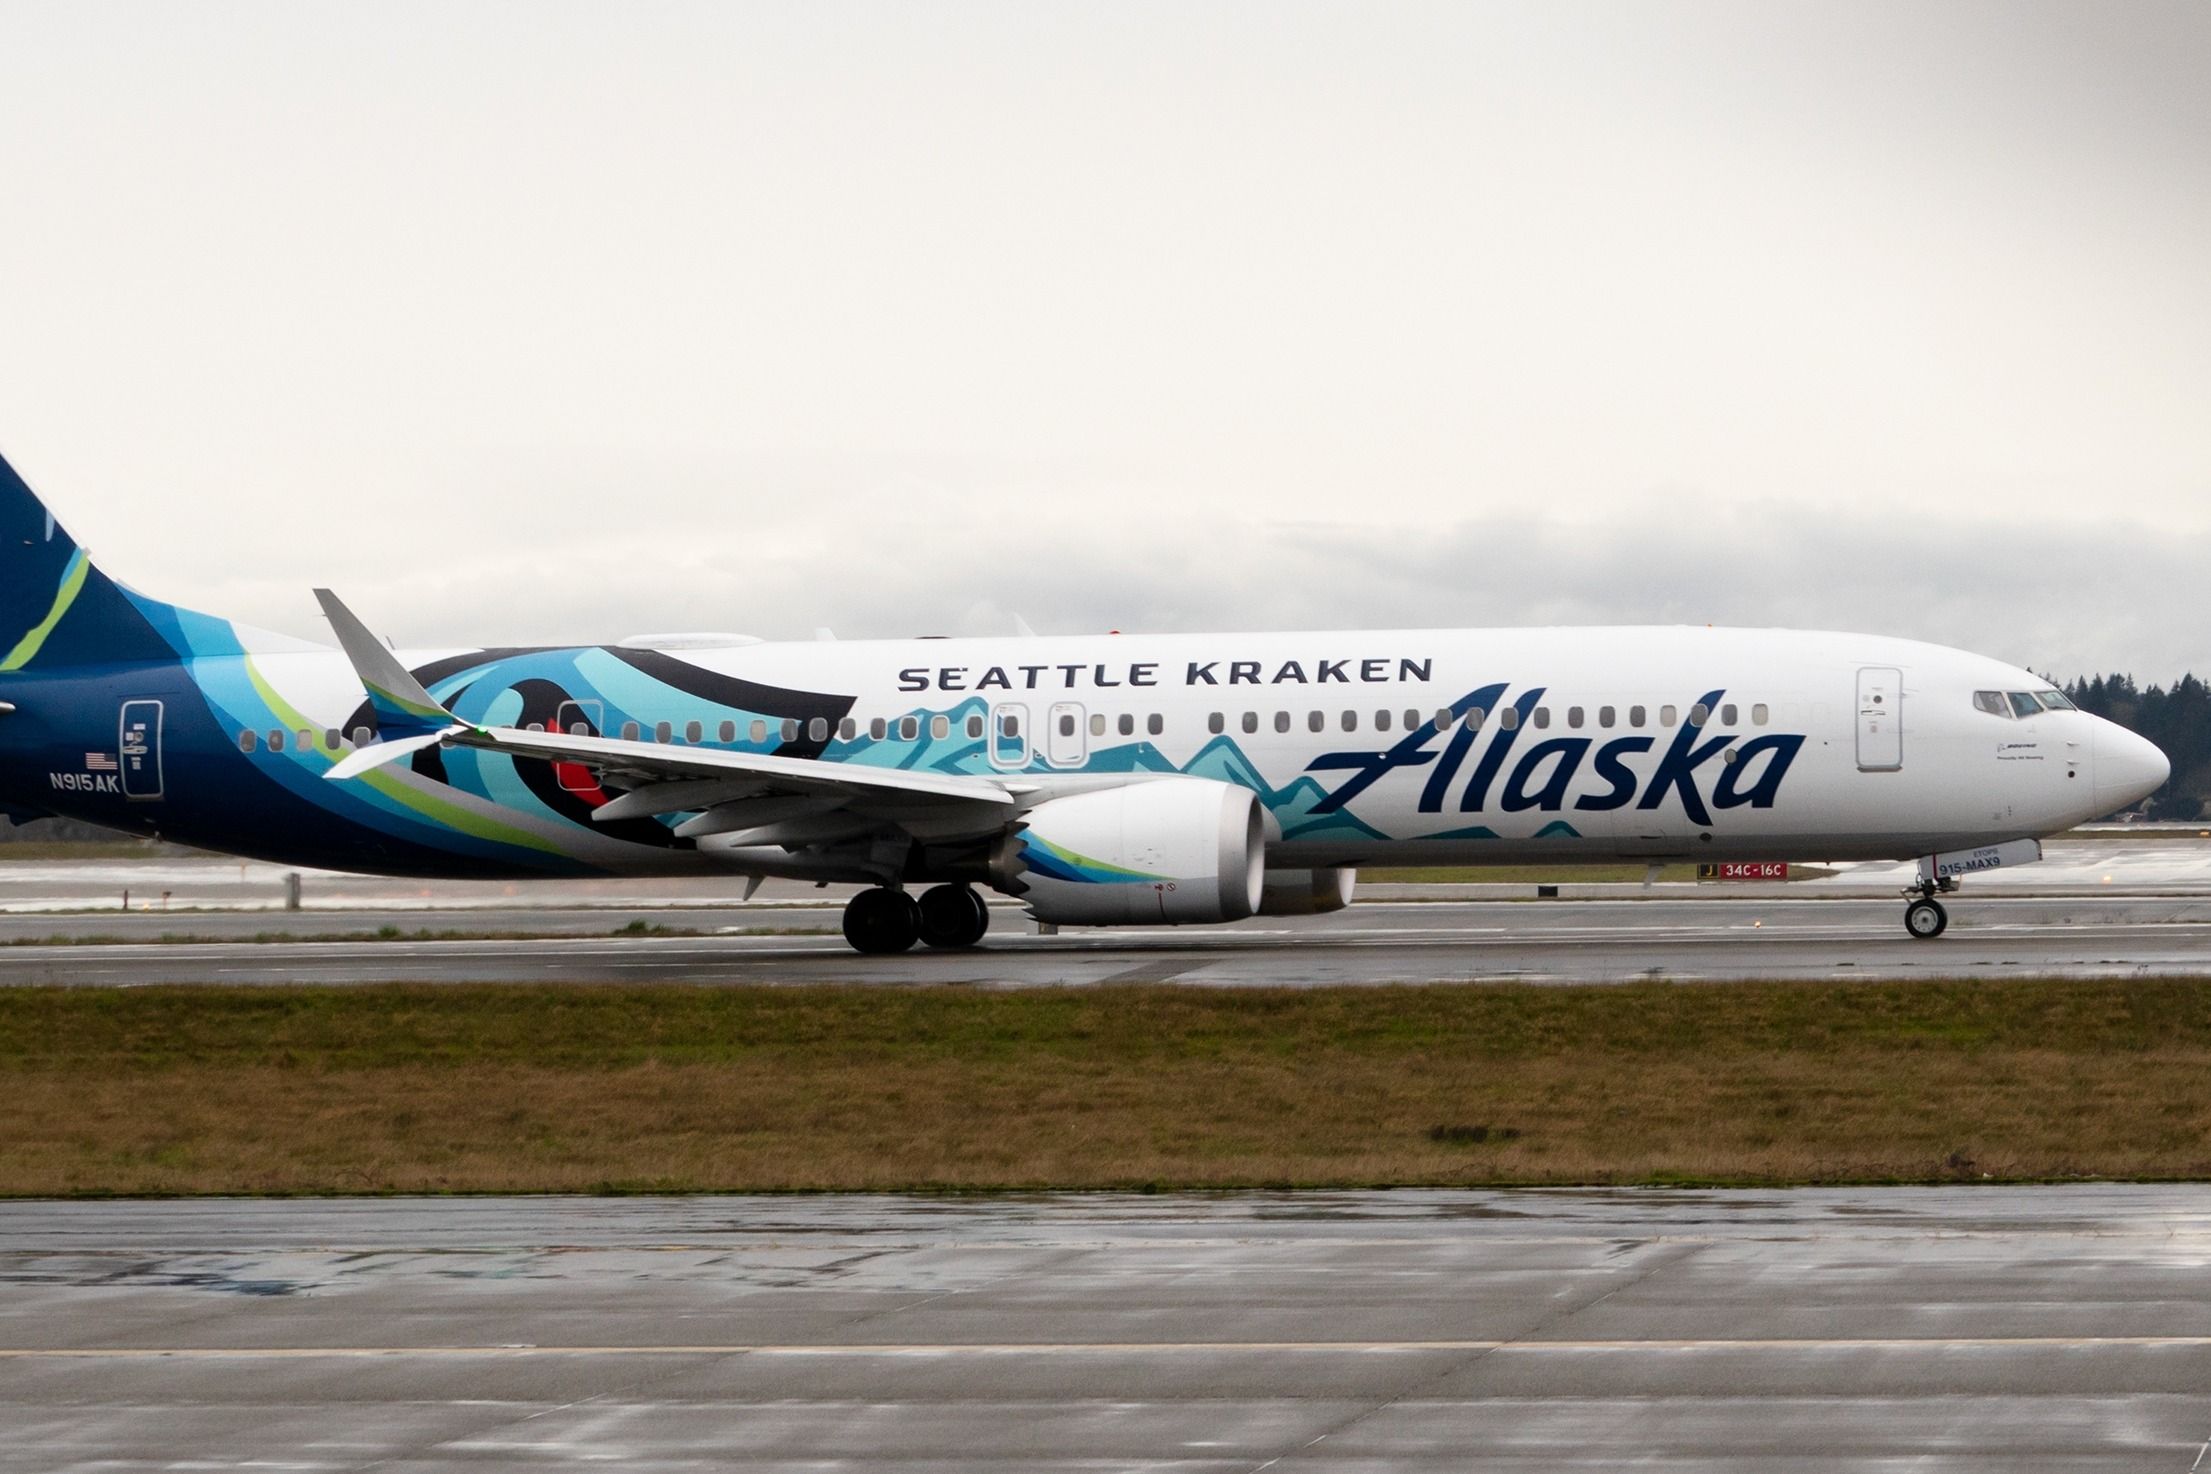 An Alaska Airlines Boeing 737 MAX 9 in Seattle Kraken livery on the apron at Seattle Tacoma International Airport.